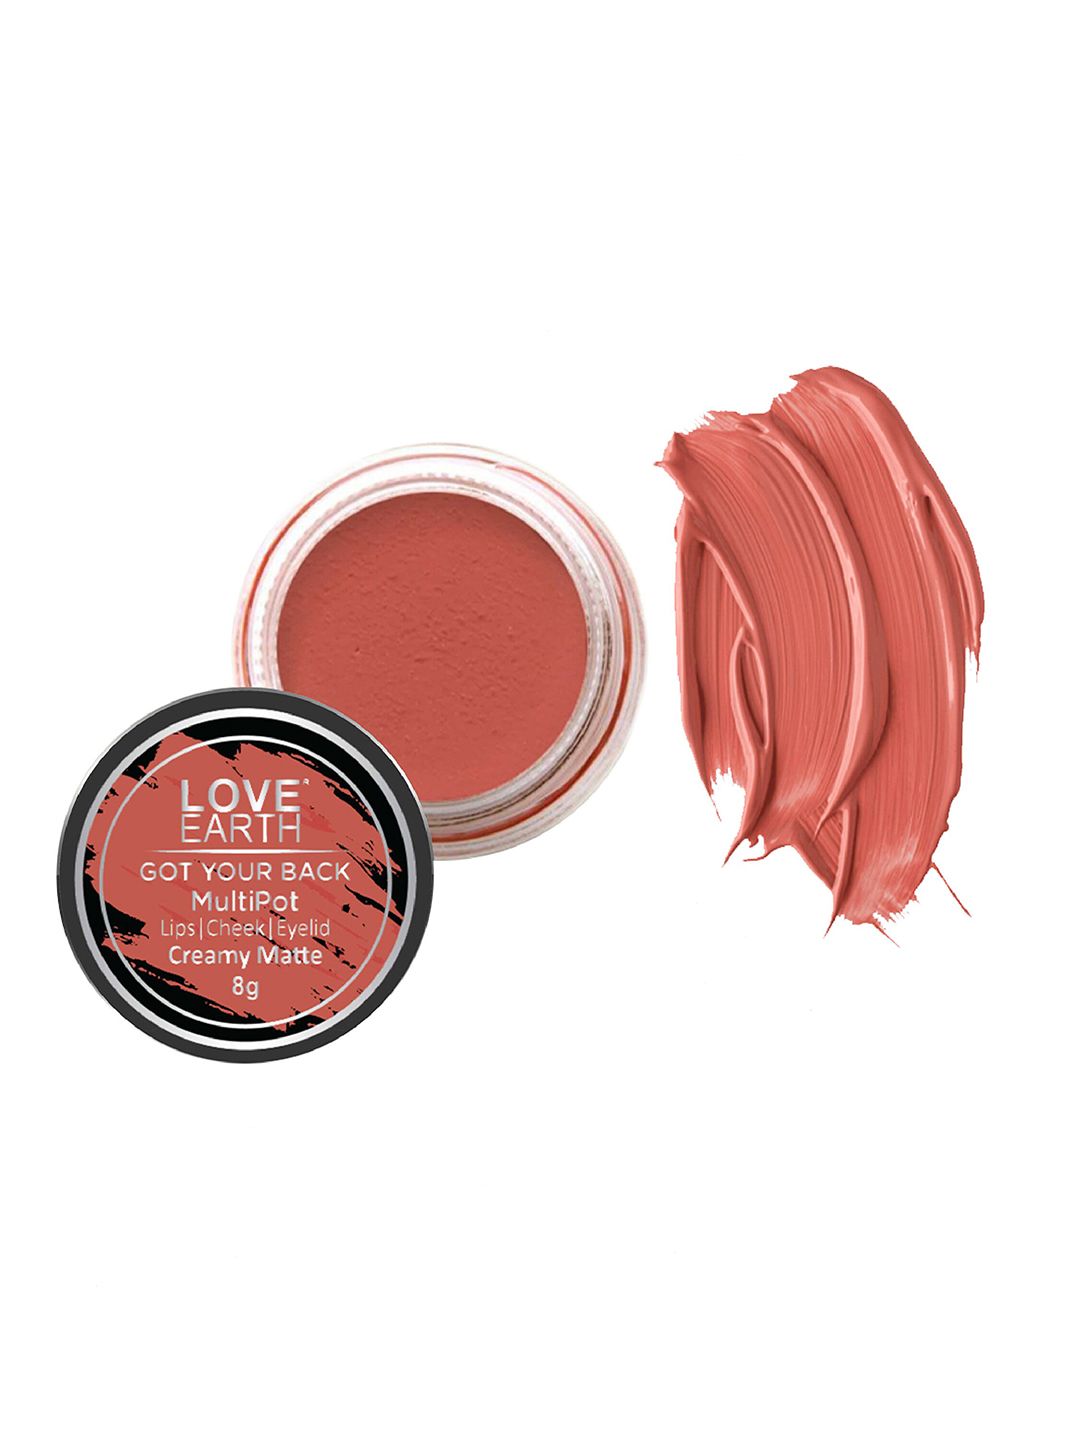 LOVE EARTH Multipot Creamy Matte Lip-Cheek-Eyelid Tint - Got Your Back Price in India